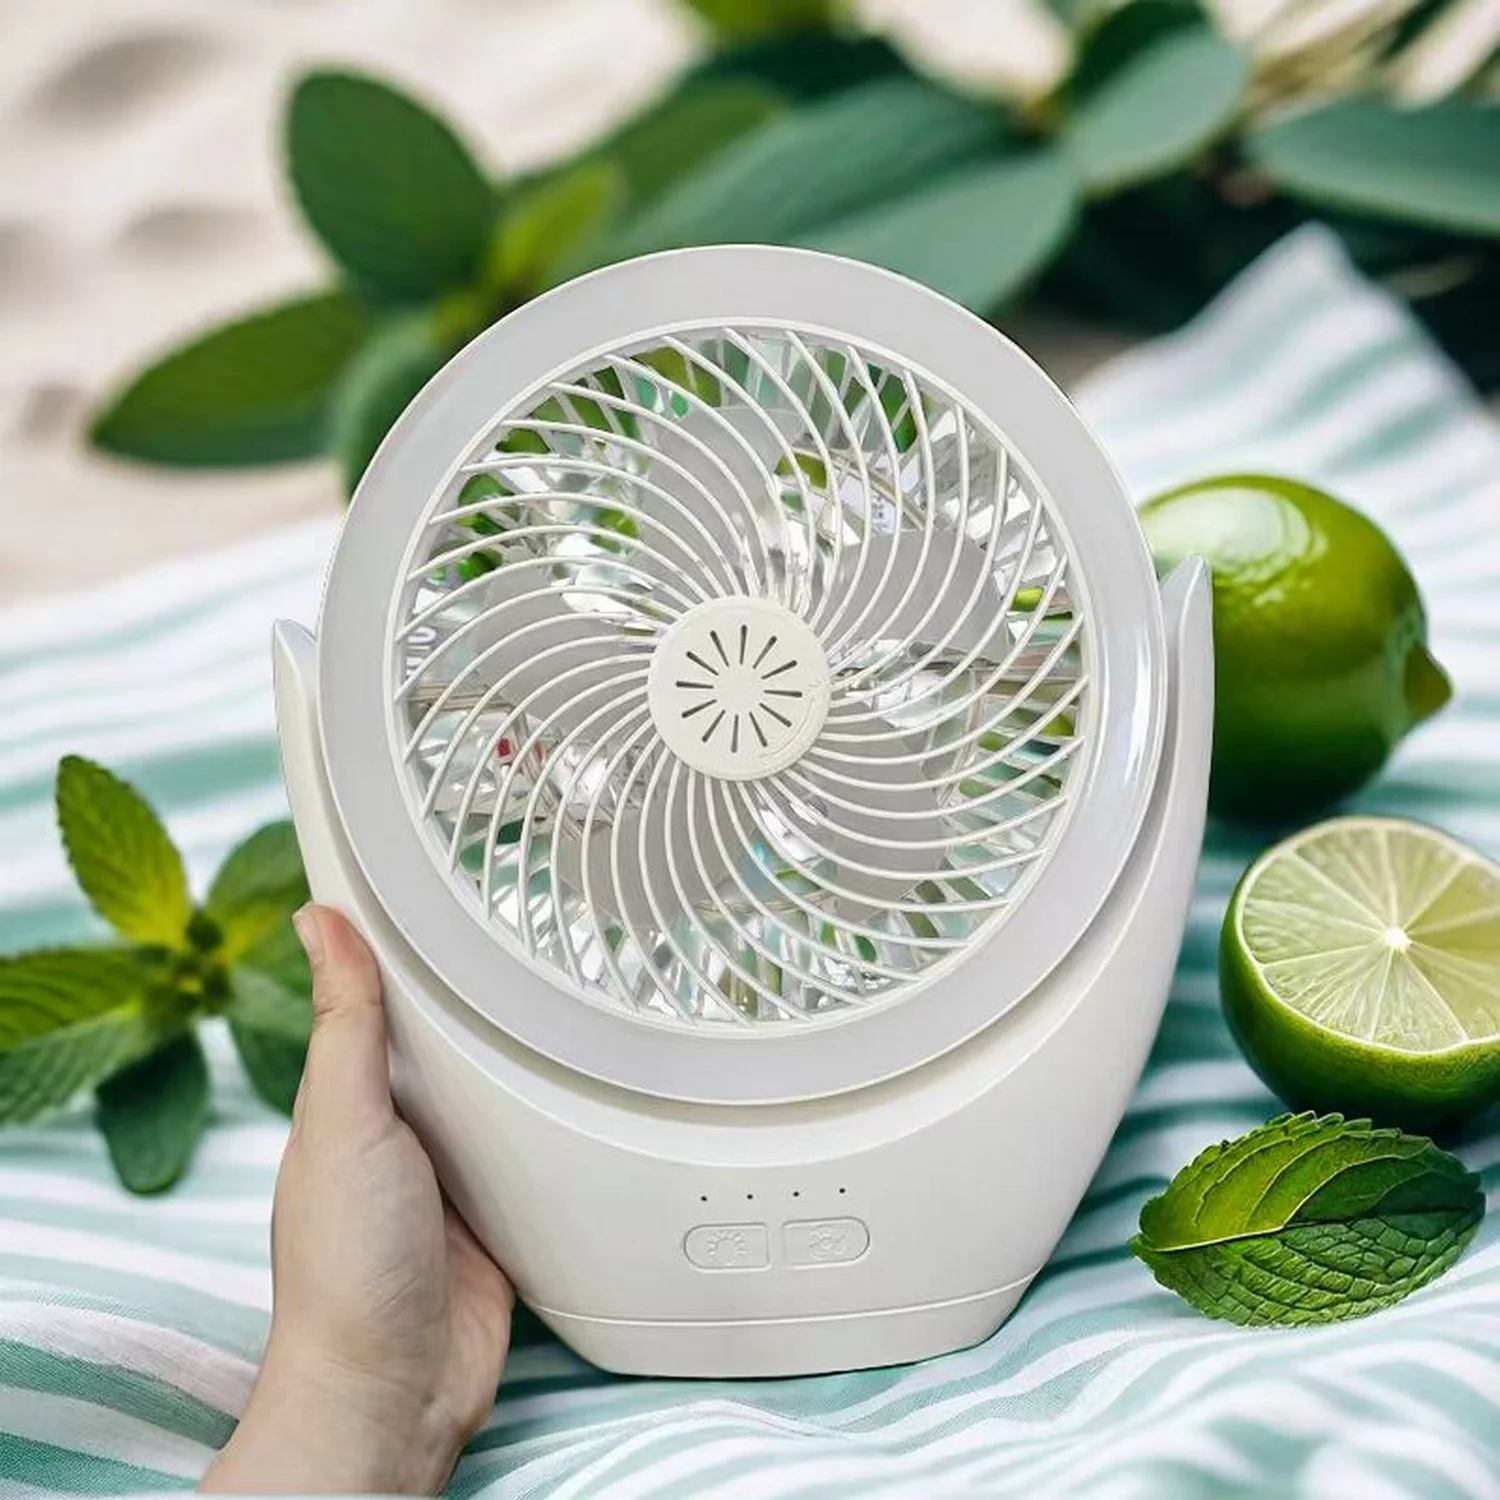 

3 In 1 Camping Fan Rechargeable Desktop Portable Circulator Wireless Ceiling Electric Fan with Power Bank LED Lighting